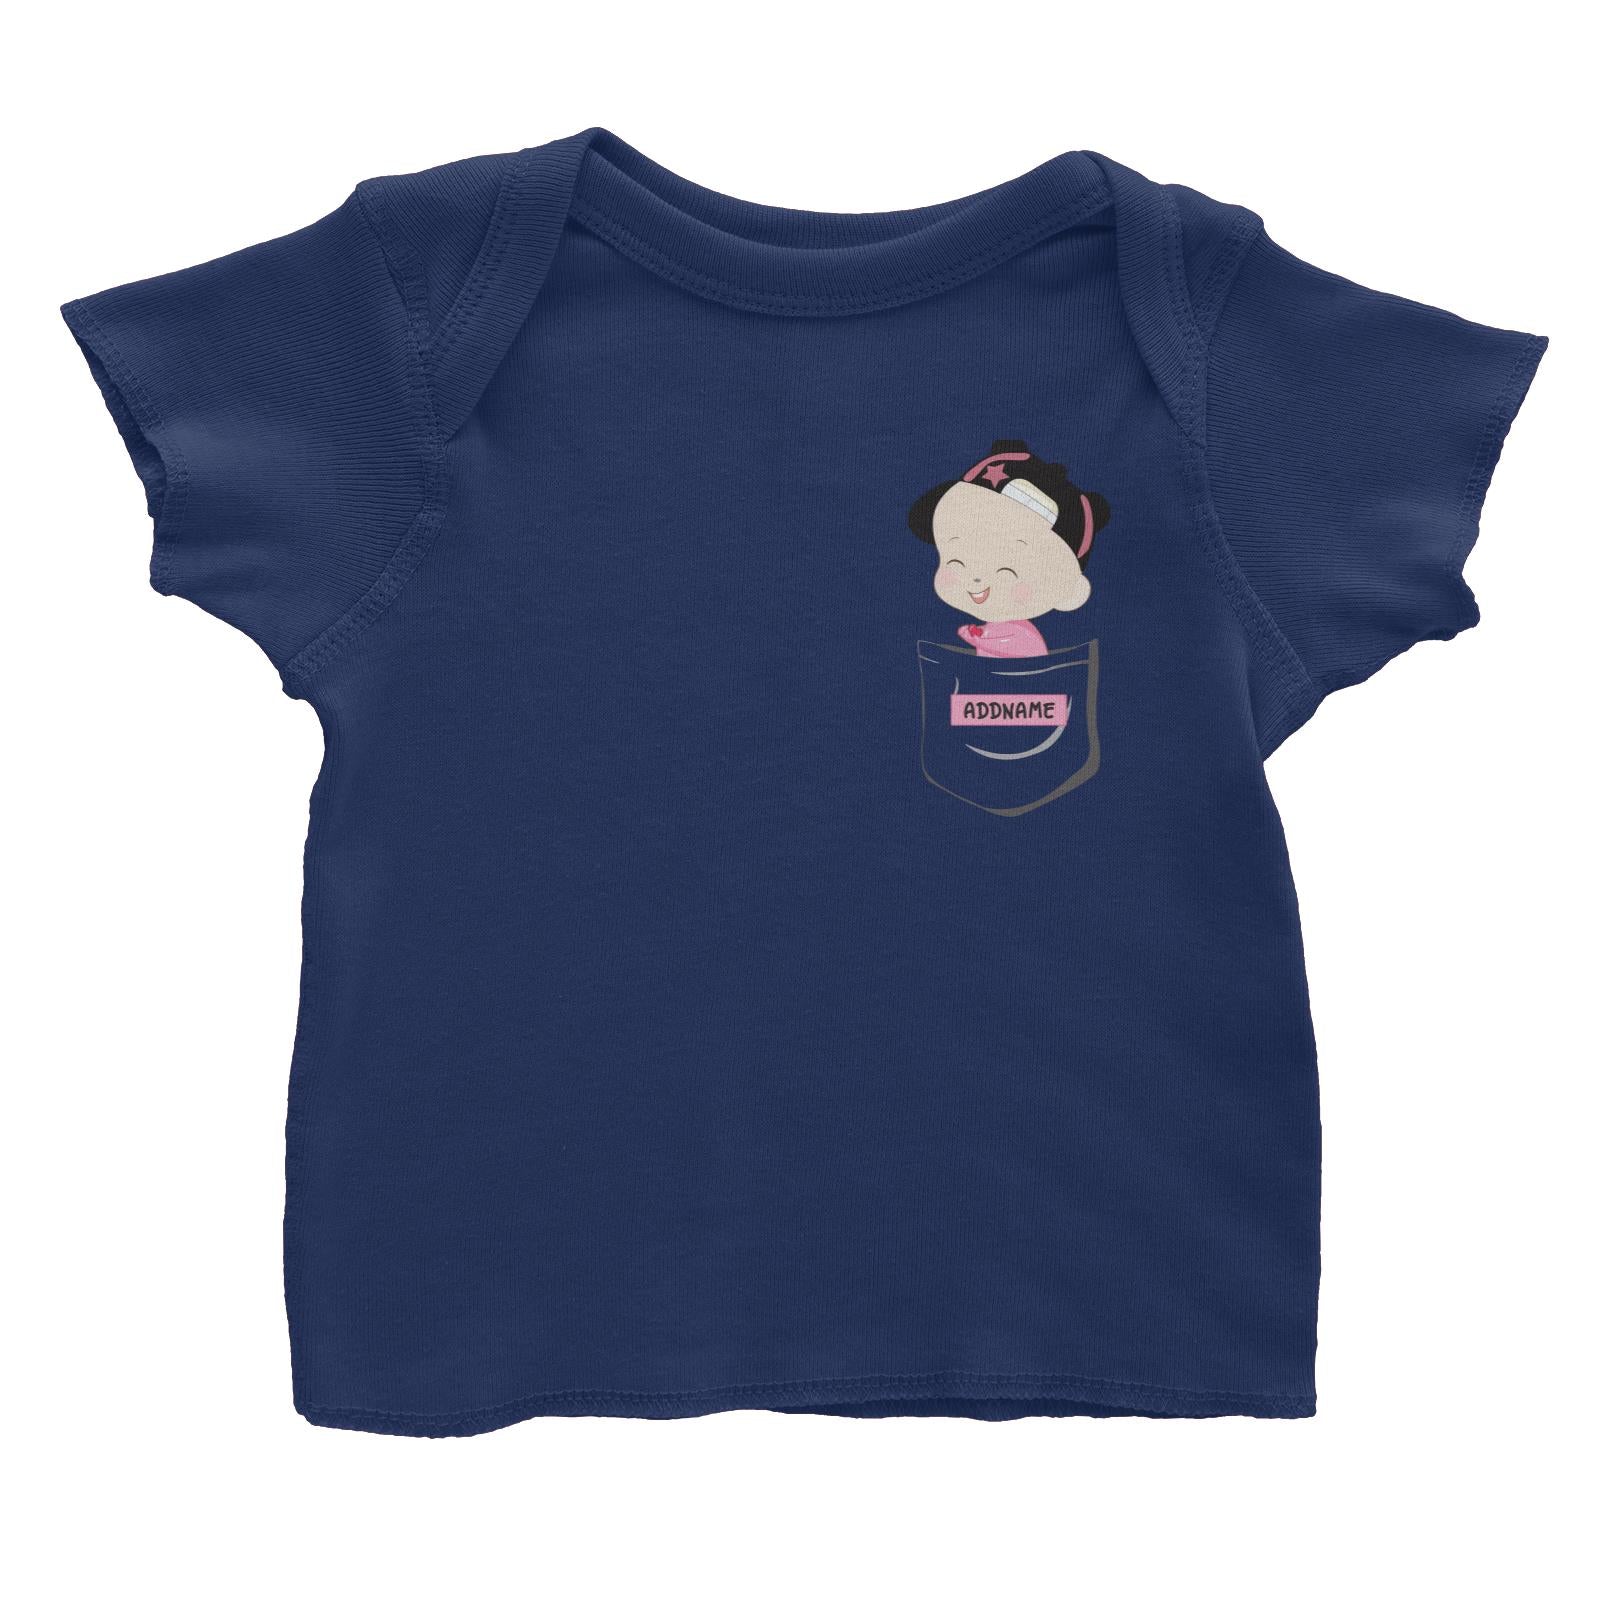 Love Family Pocket Baby Girl Addname Baby T-Shirt